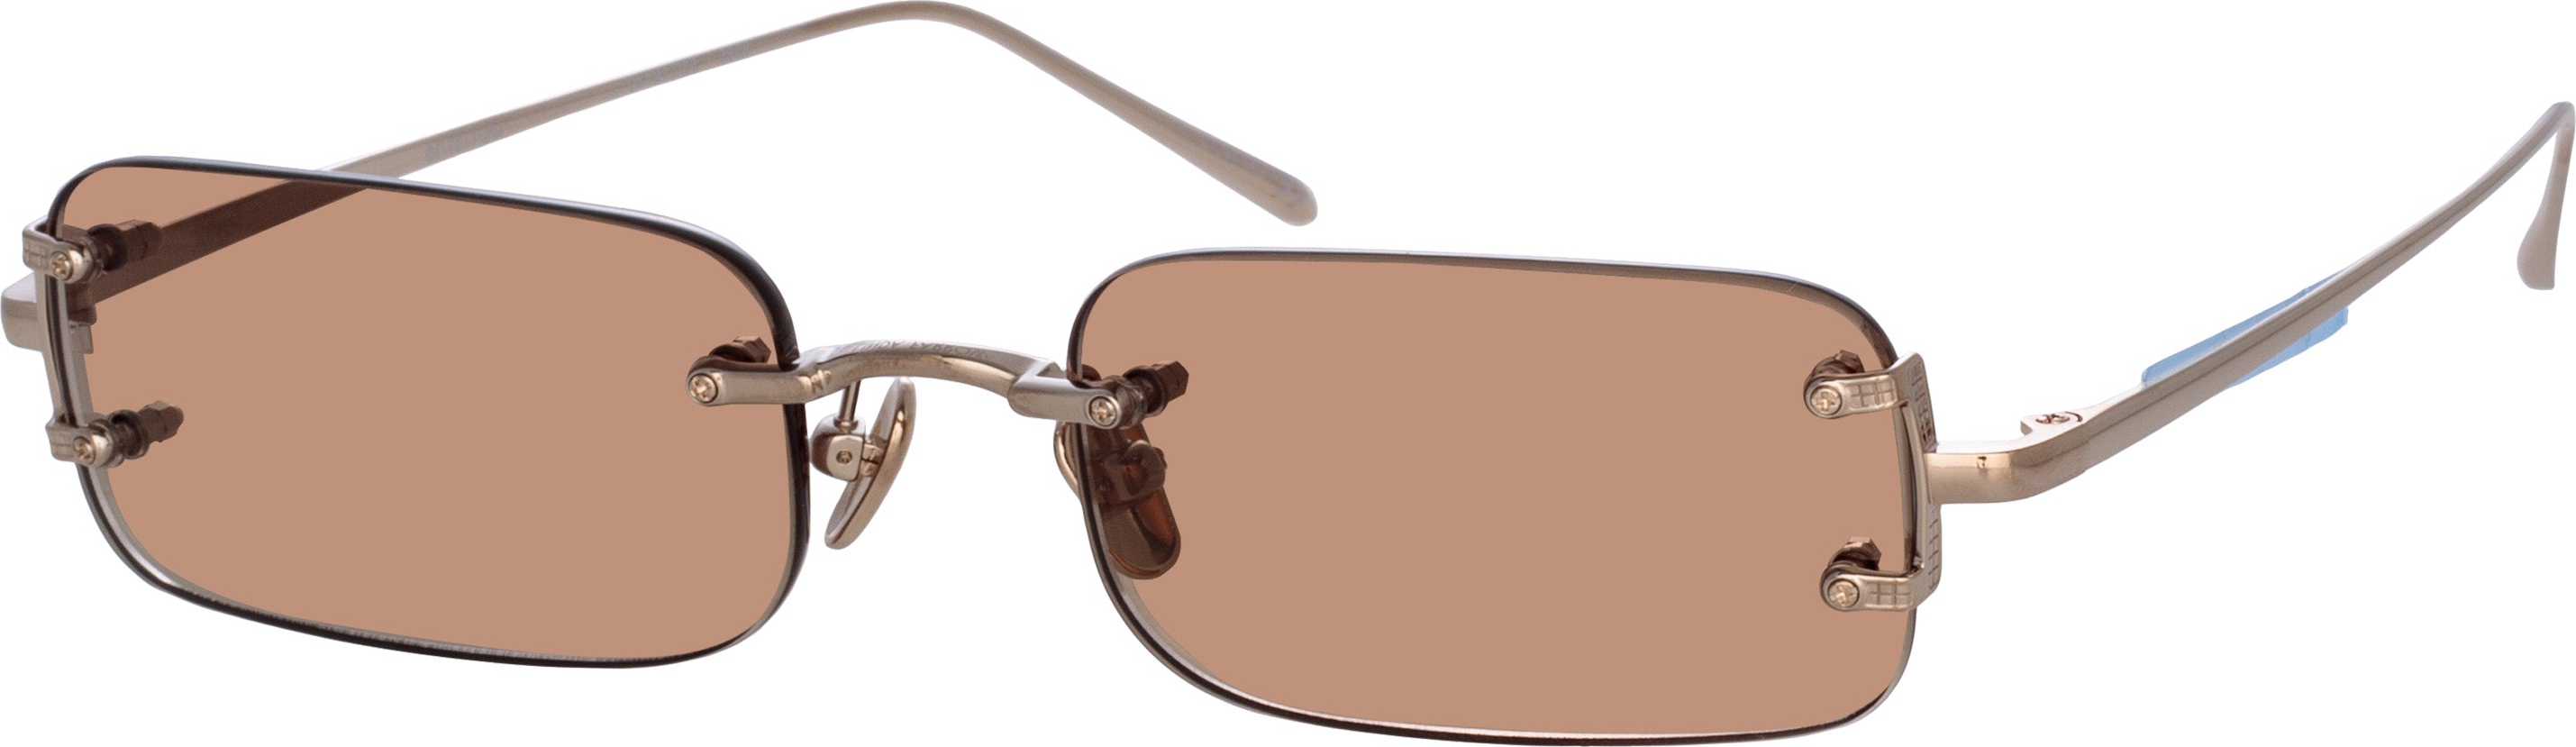 Color_LFL1131C10SUN - Taylor Rectangular Sunglasses in Light Gold and Sand